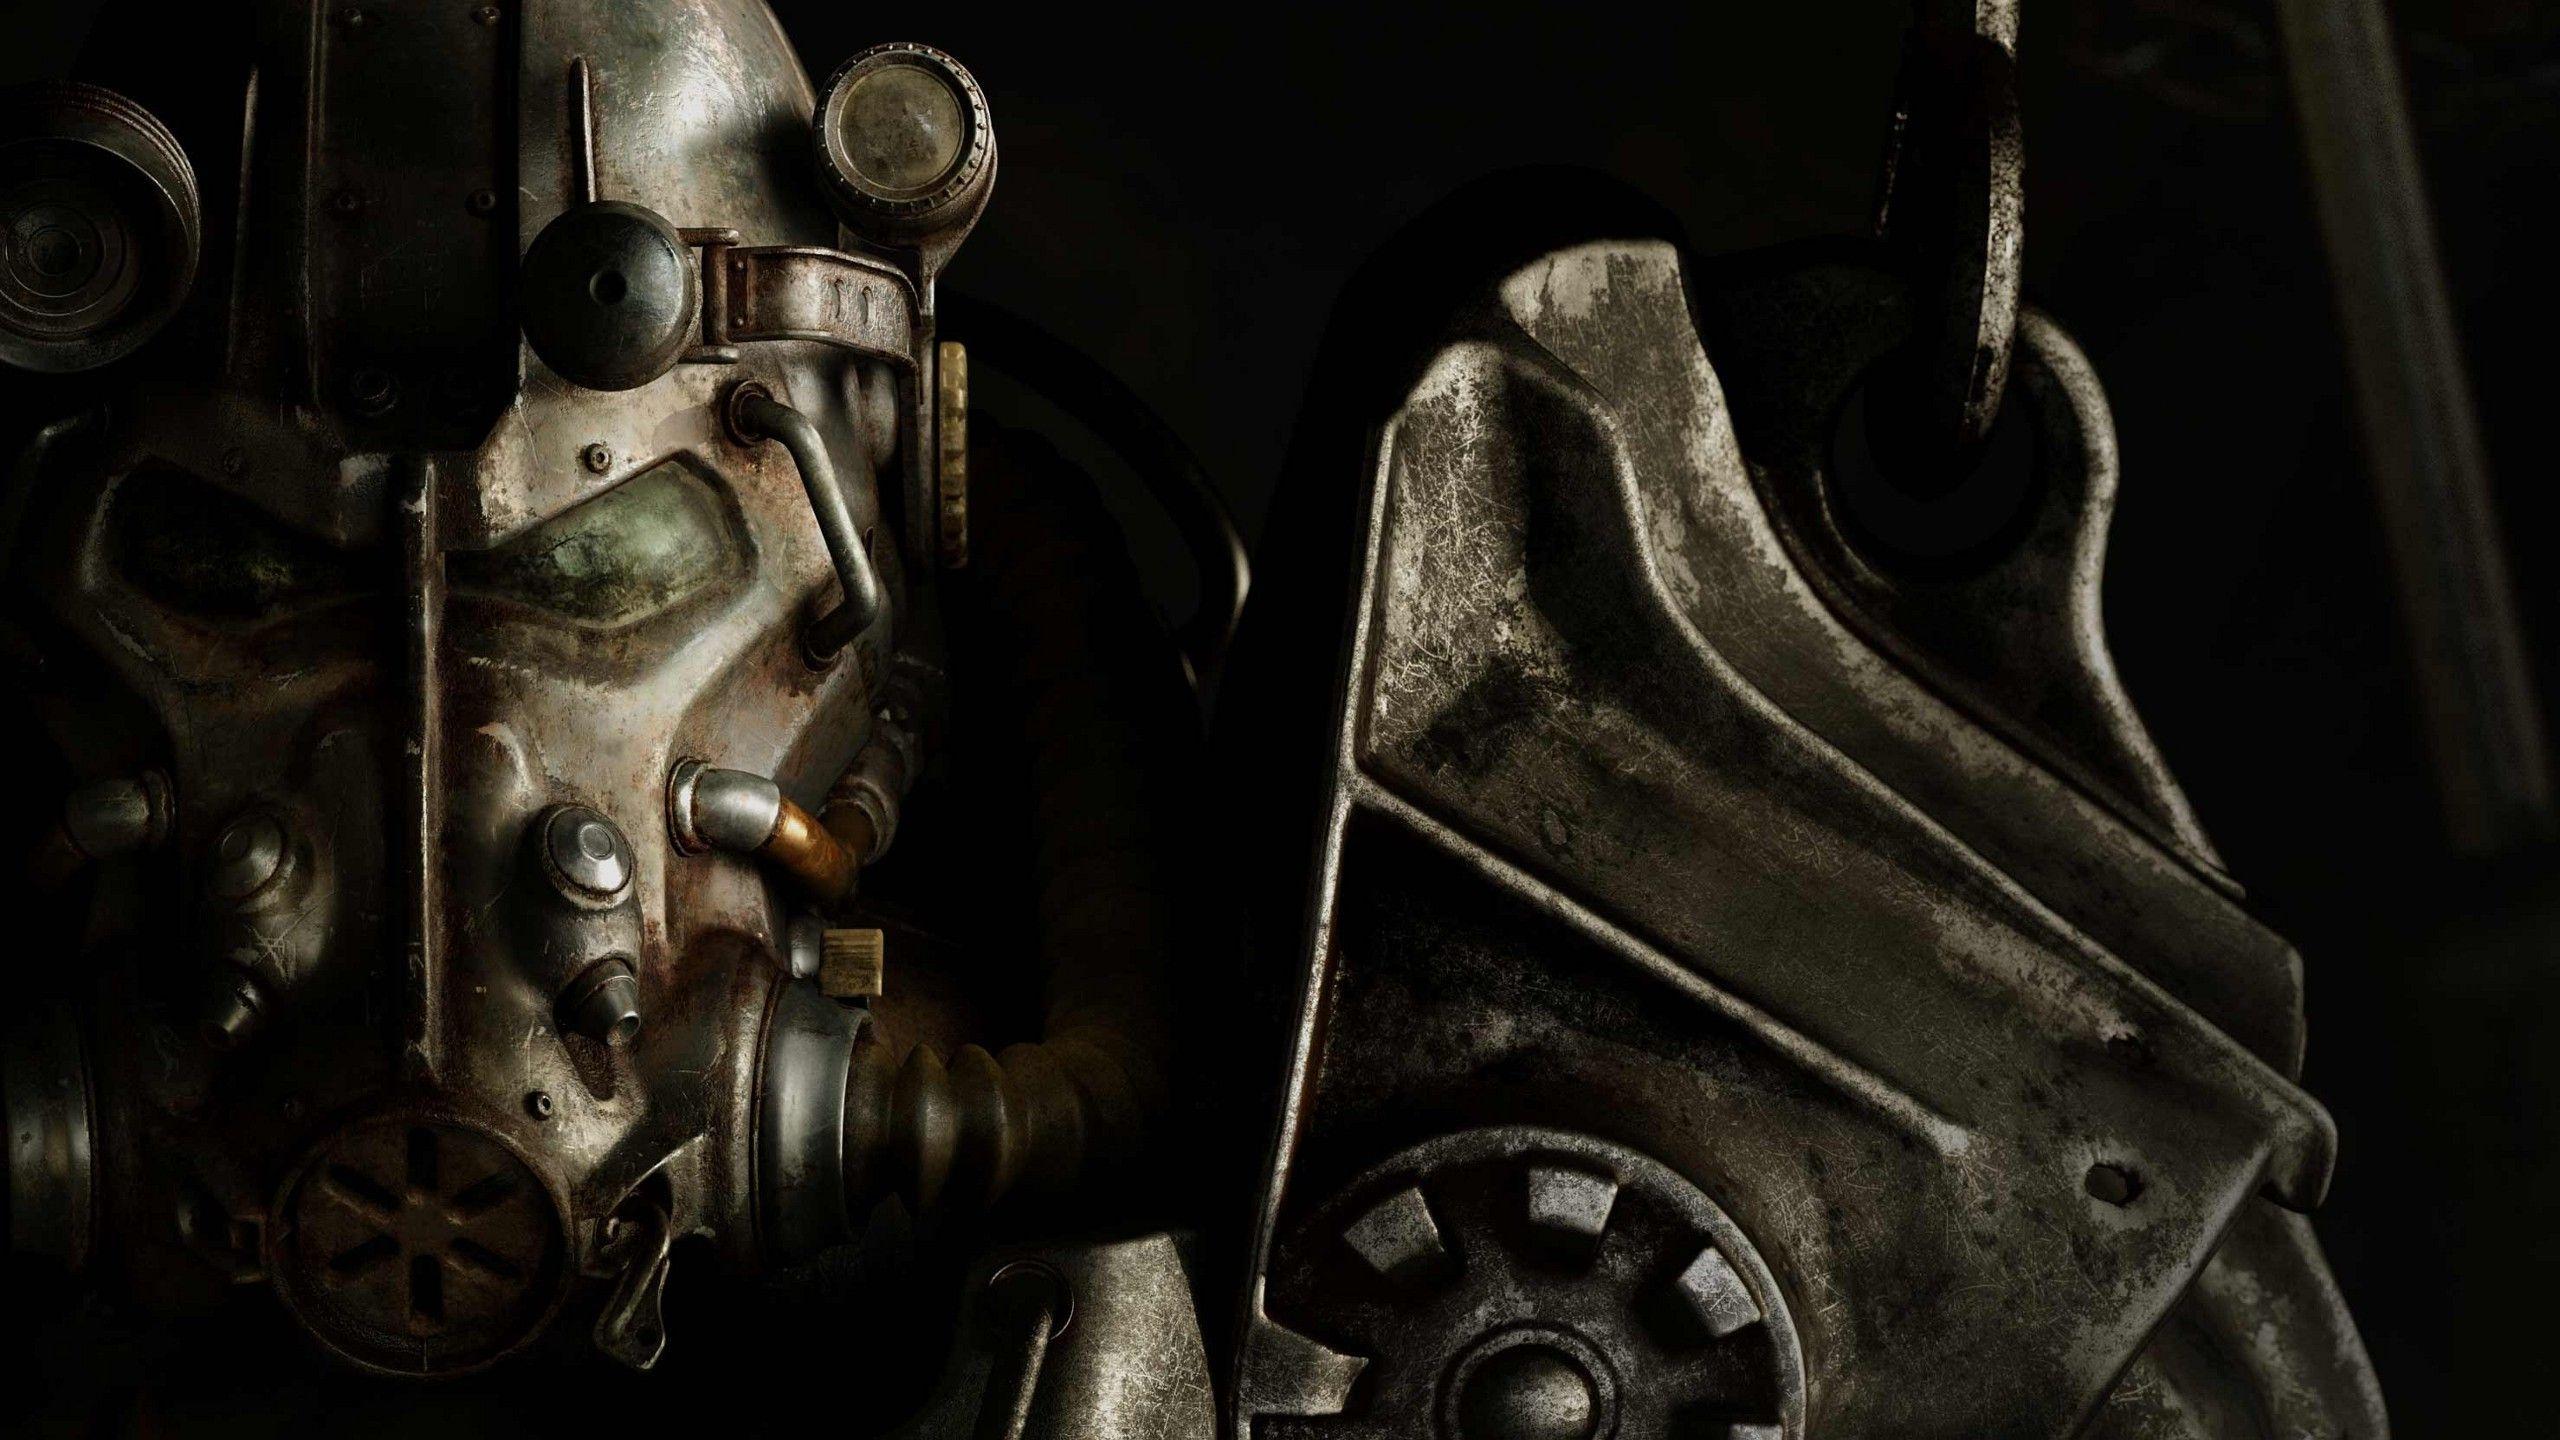 fallout video games fallout 4 power armor wallpaper and background